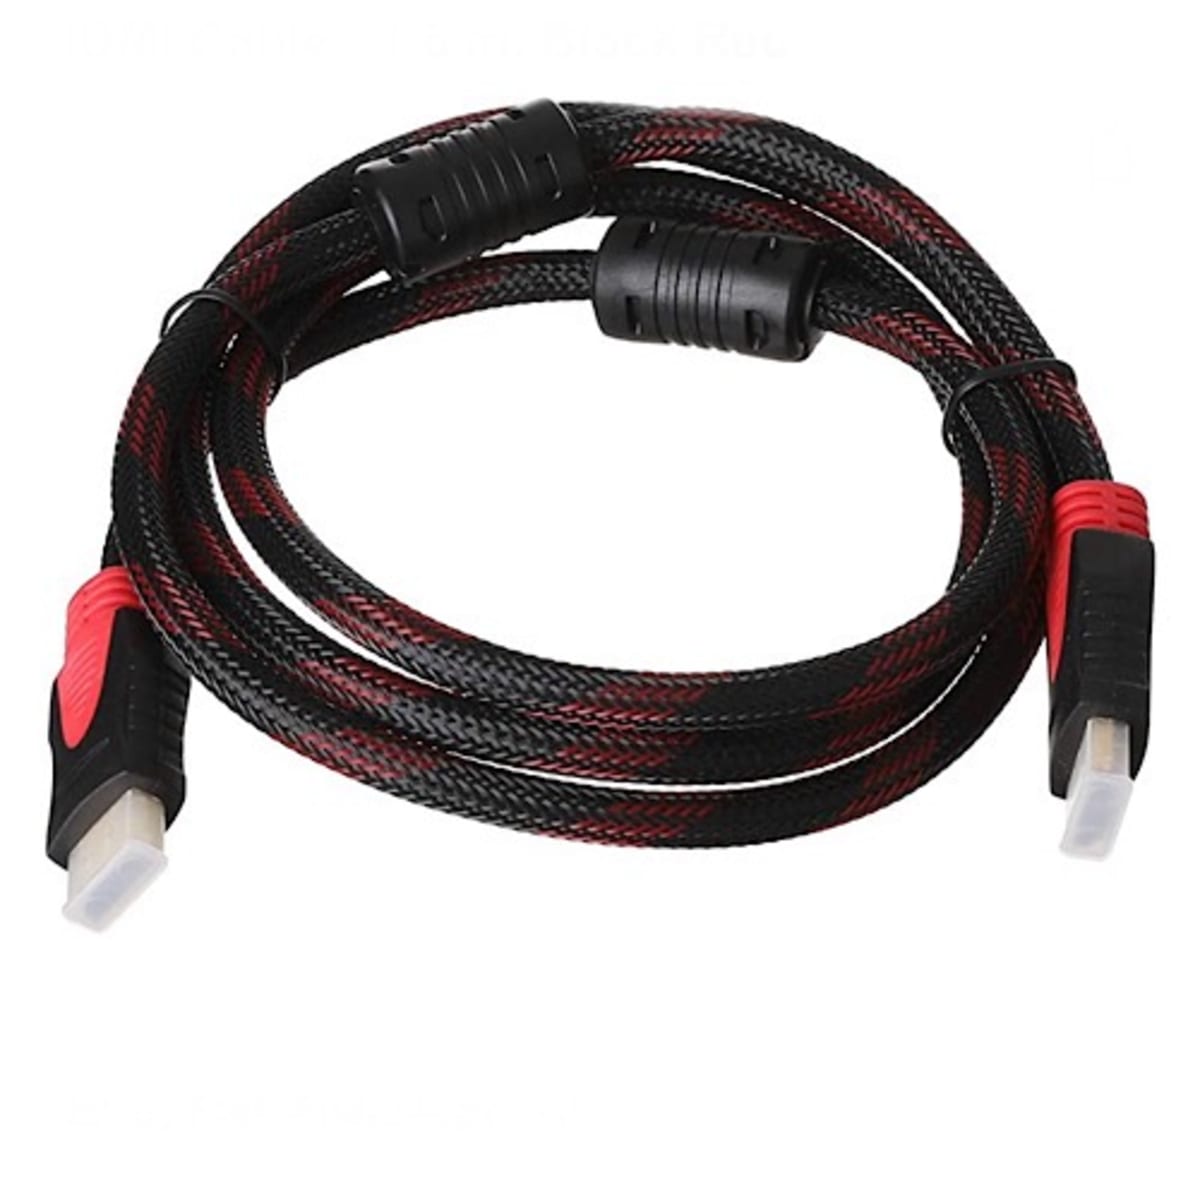 HDMI Cable - Red/black - 3m